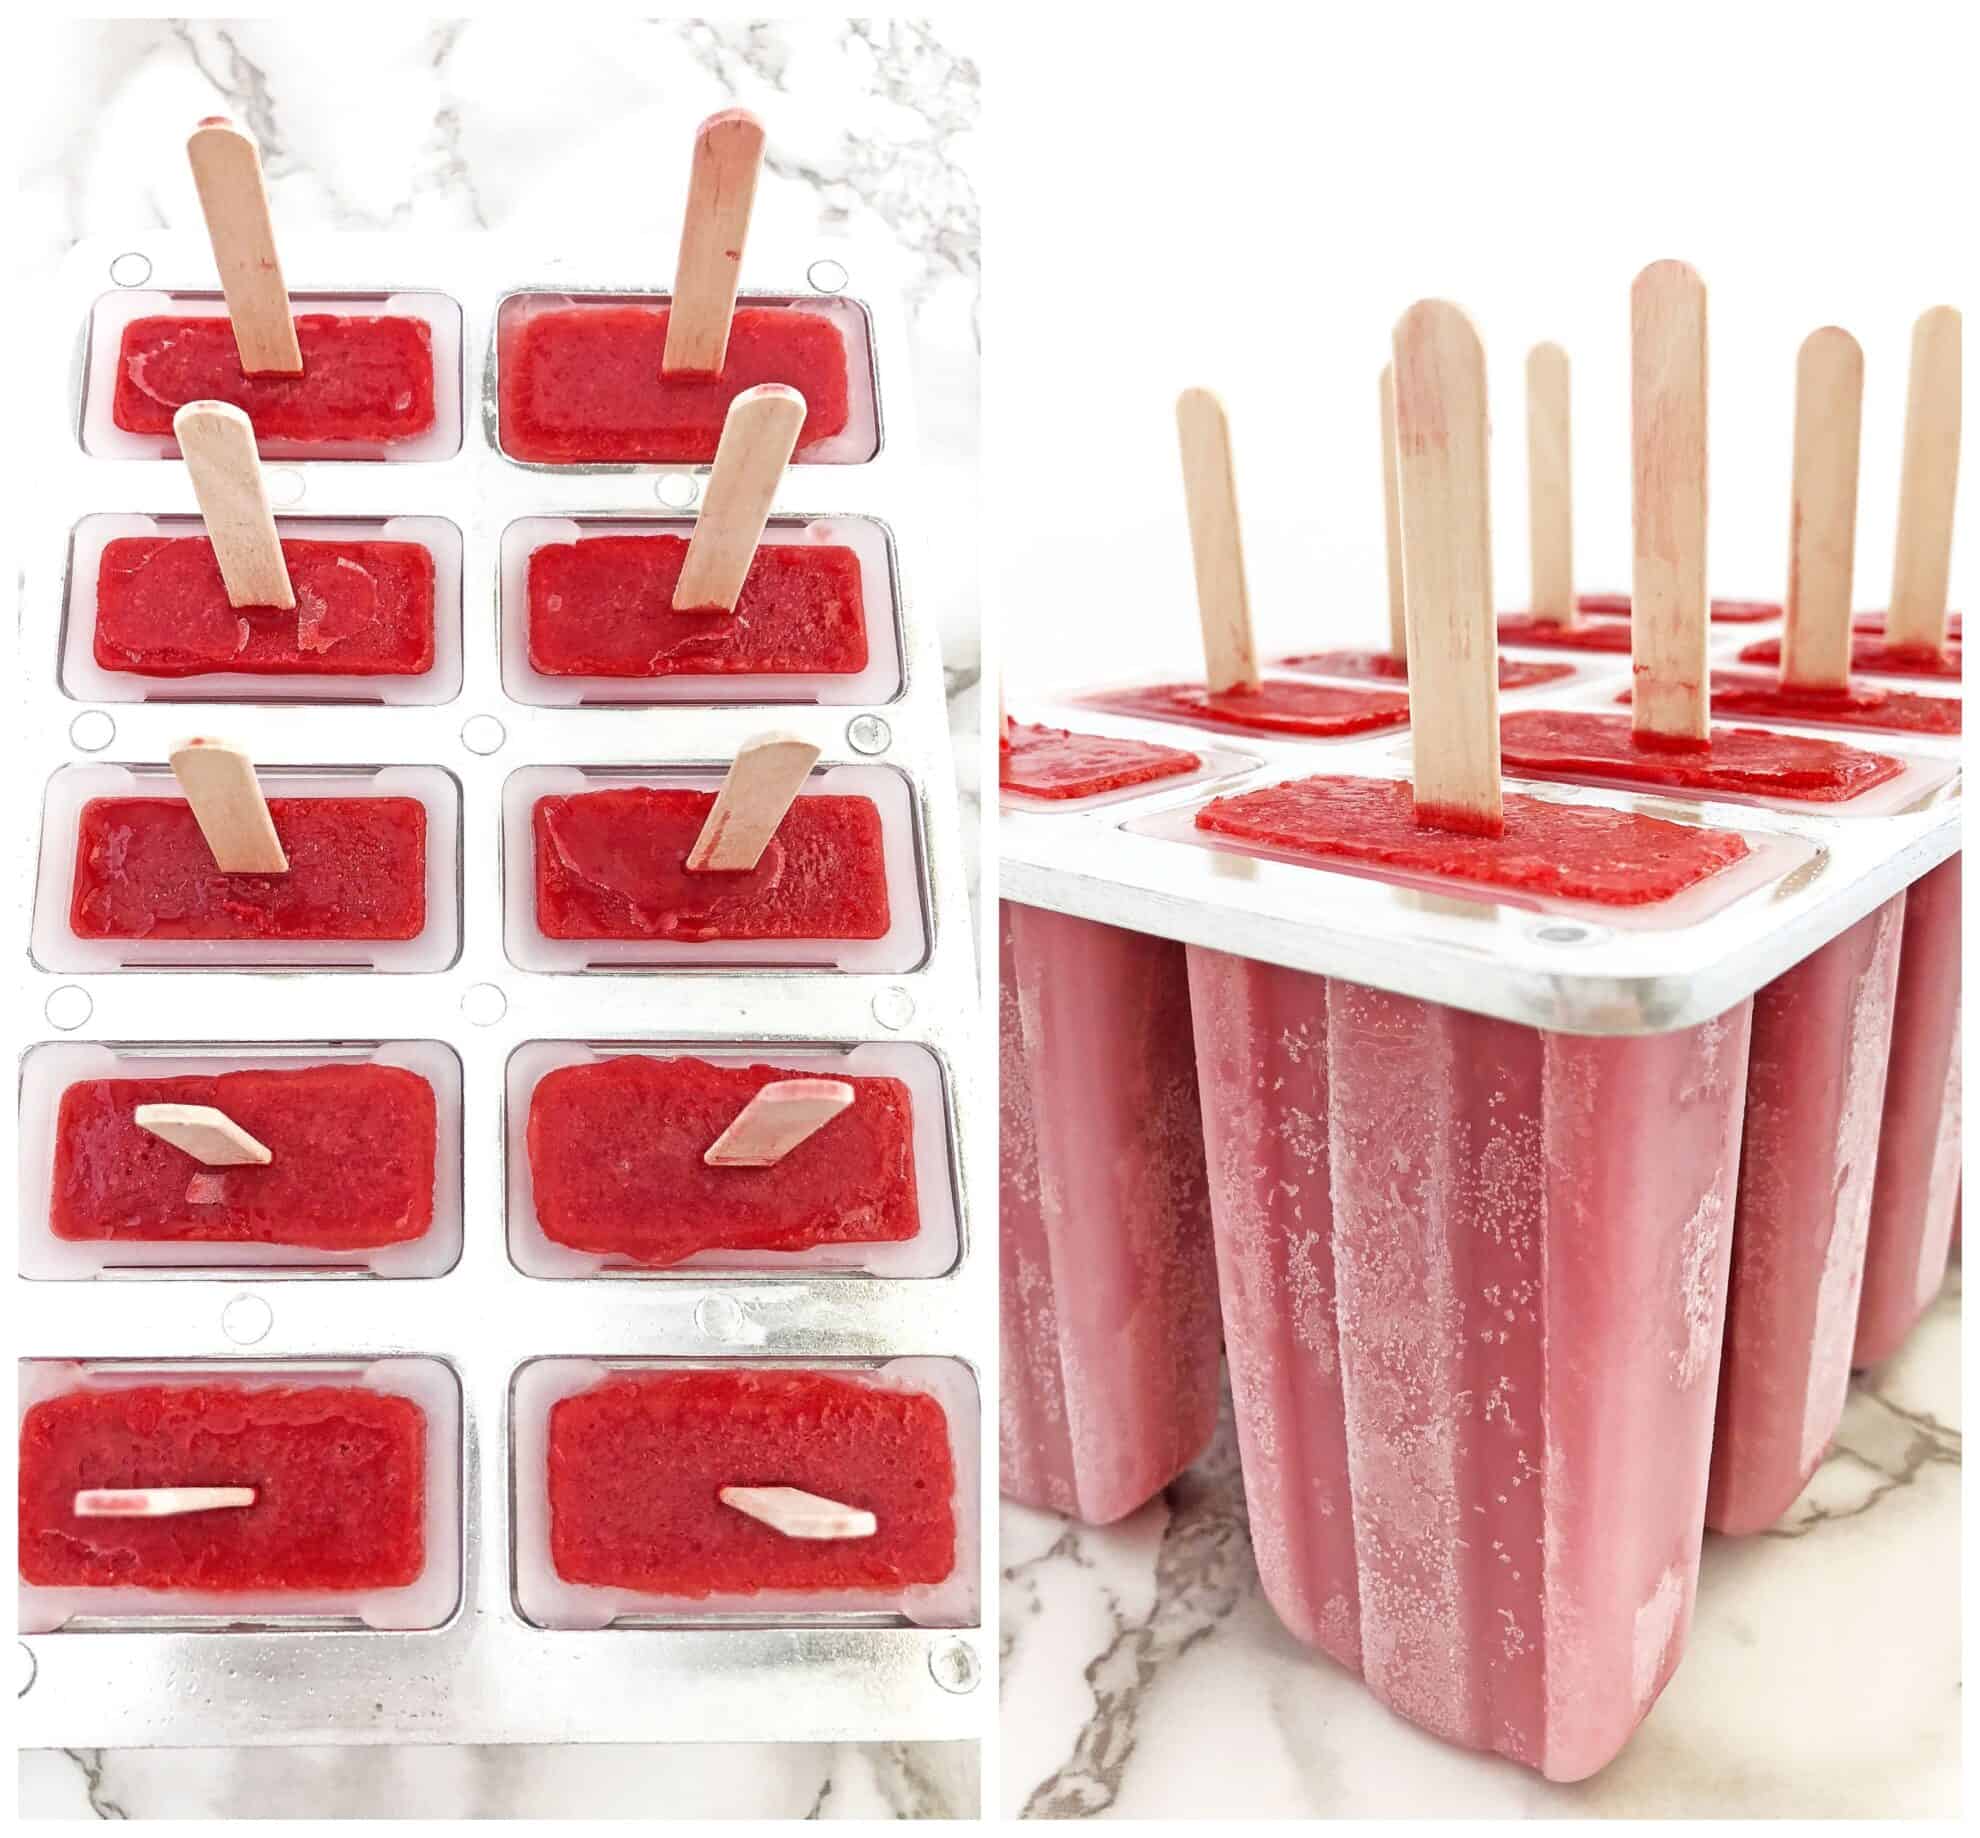 Your Strawberry Popsicles are ready to serve and enjoy on a hot summer day!